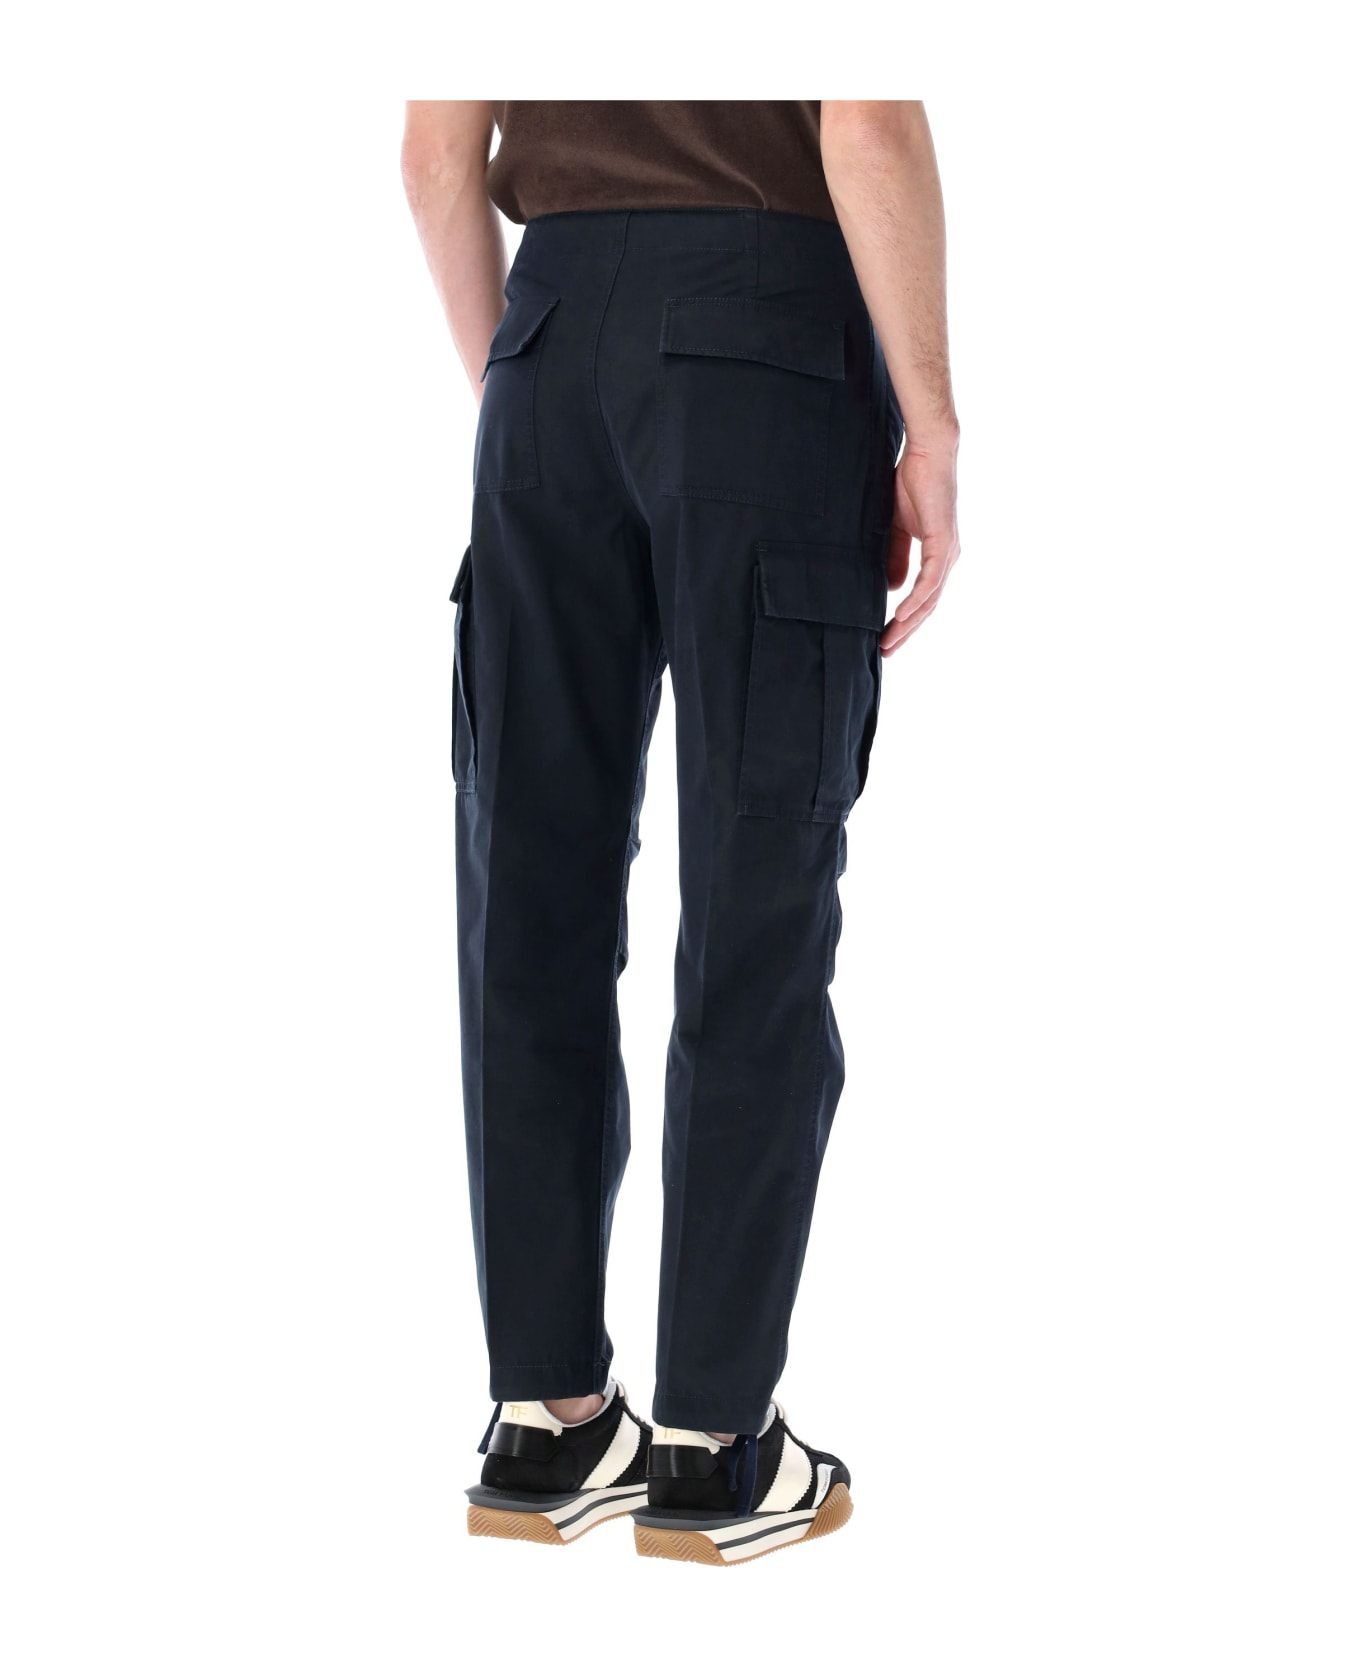 Tom Ford Lightweight Cargo Pants - INK